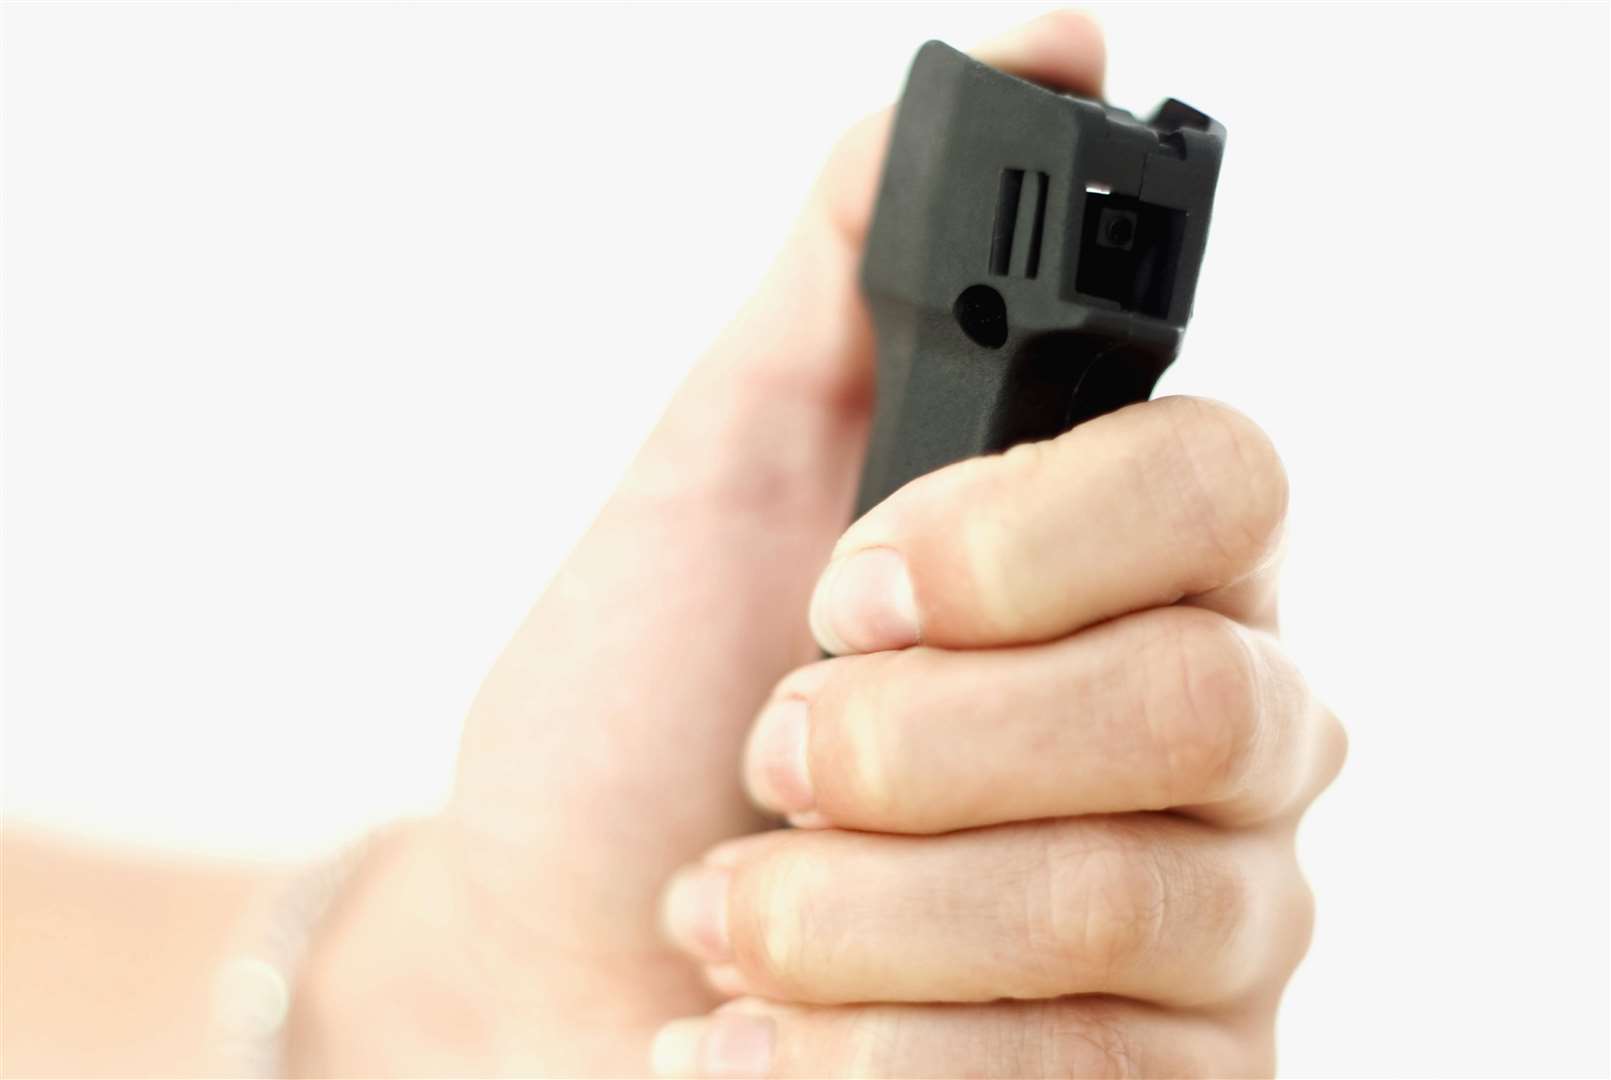 Prison officers are to be given cannisters of pepper spray. Picture: Thinkstock